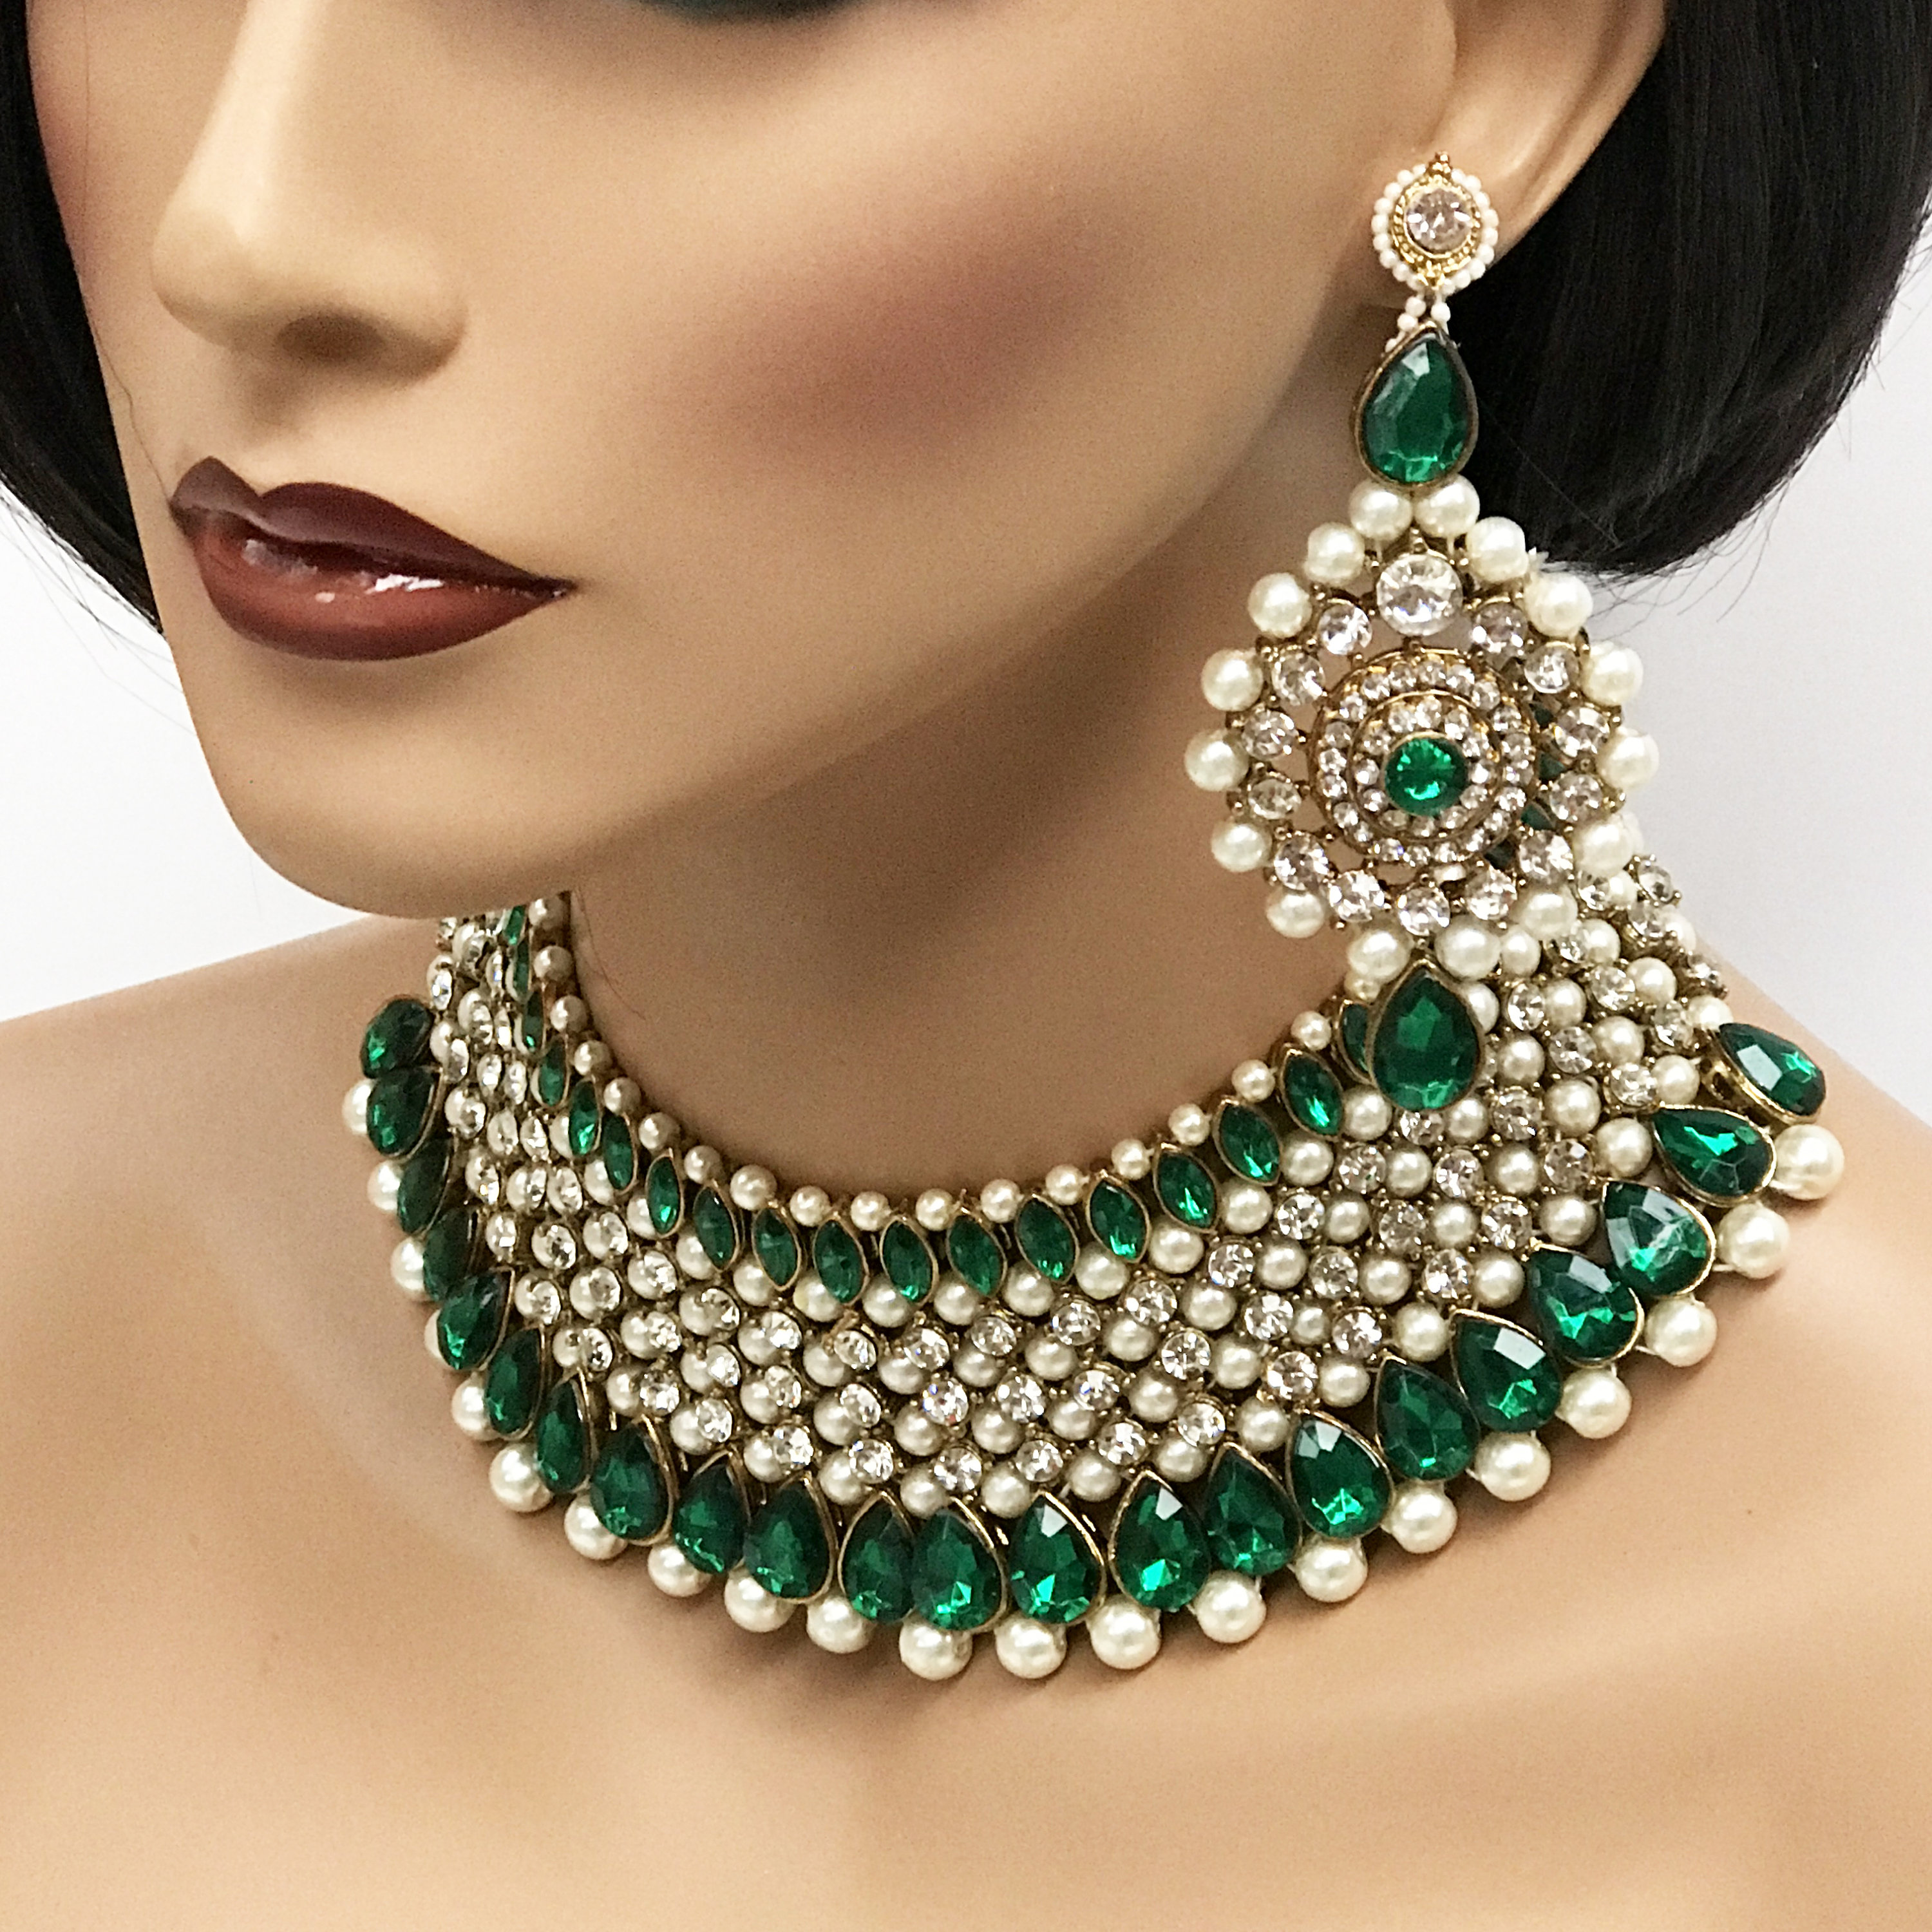 Indian Bollywood Ethnic Green Choker Pearl Chain Necklace Earrings Jewelry Set 